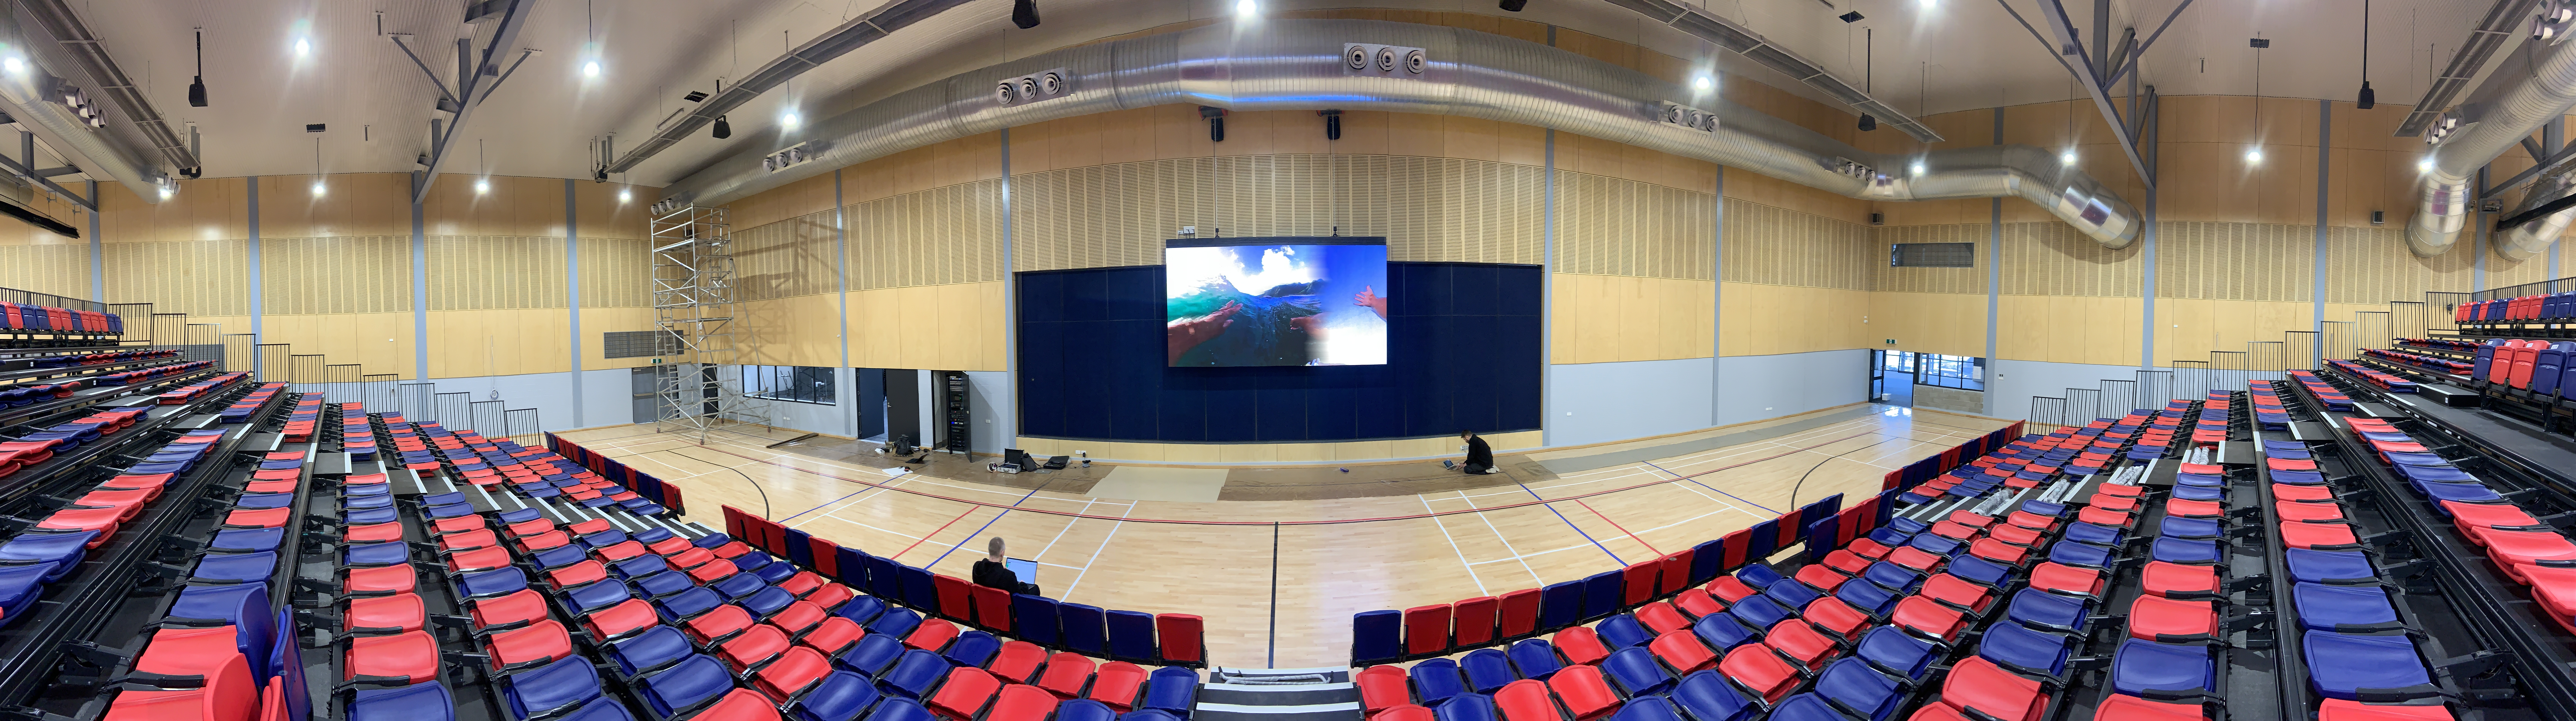 St Ignatius - large video wall pixel pitch hanging